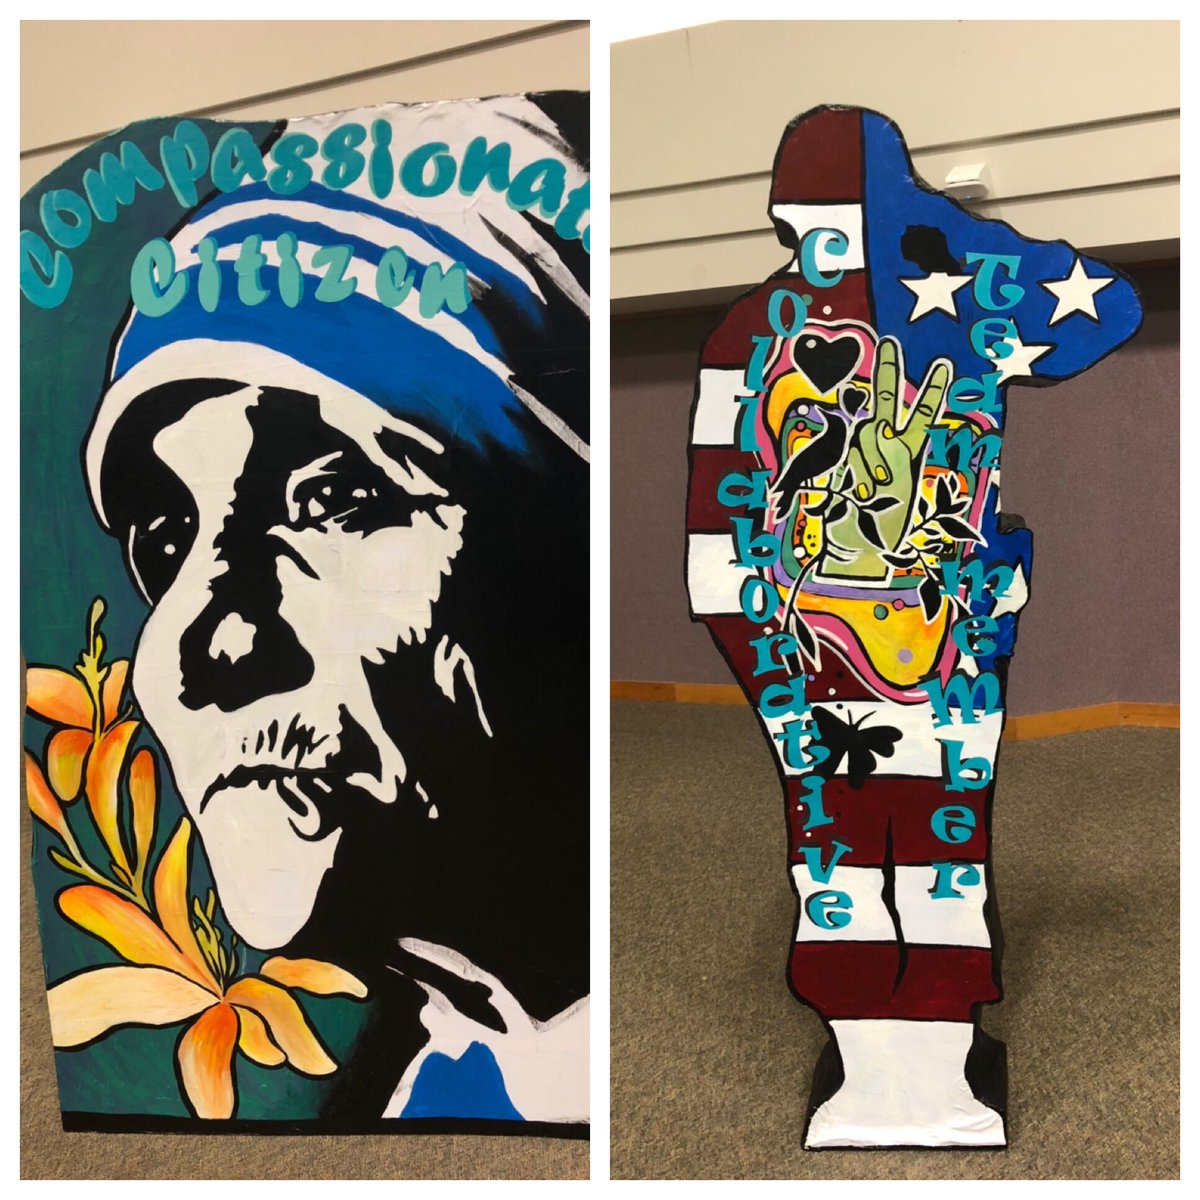 Shout out to @SFAHS_Bulldogs for these AMAZING art displays representing the #profileofagraduate
@rizvanq73 @FortBendISD